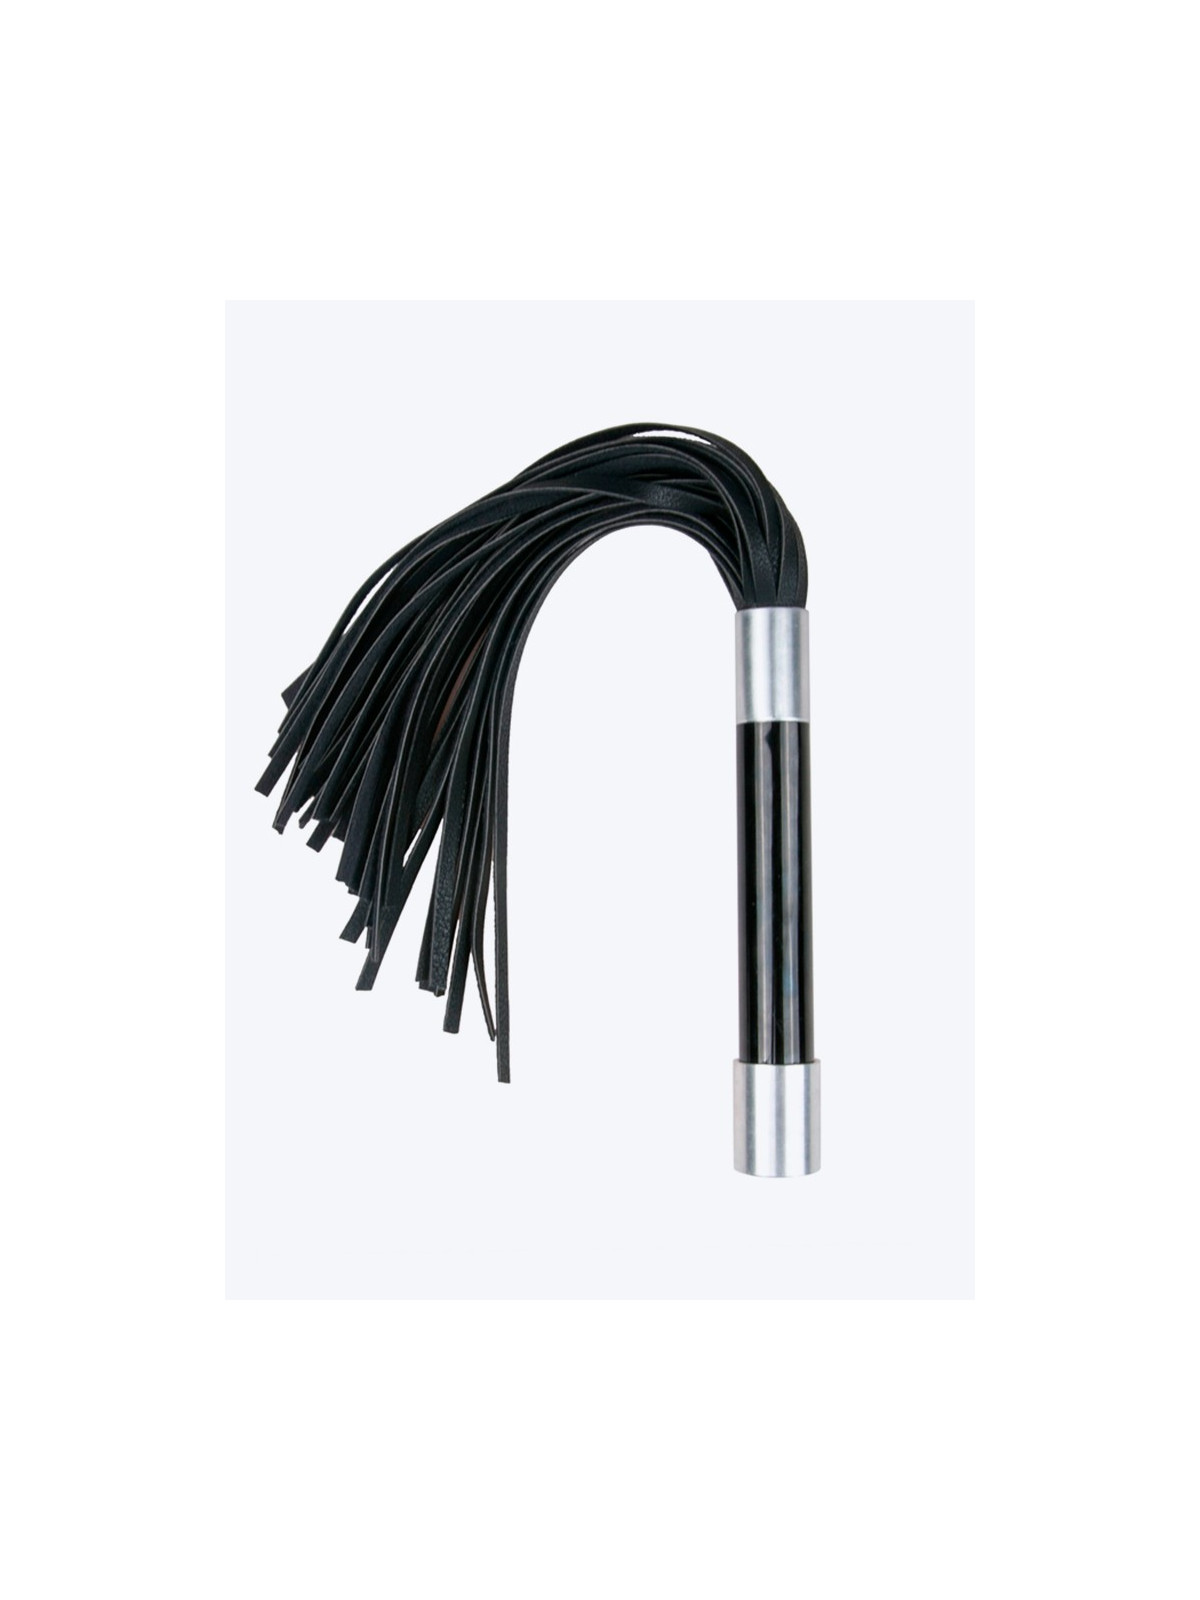 Flogger with metal handle